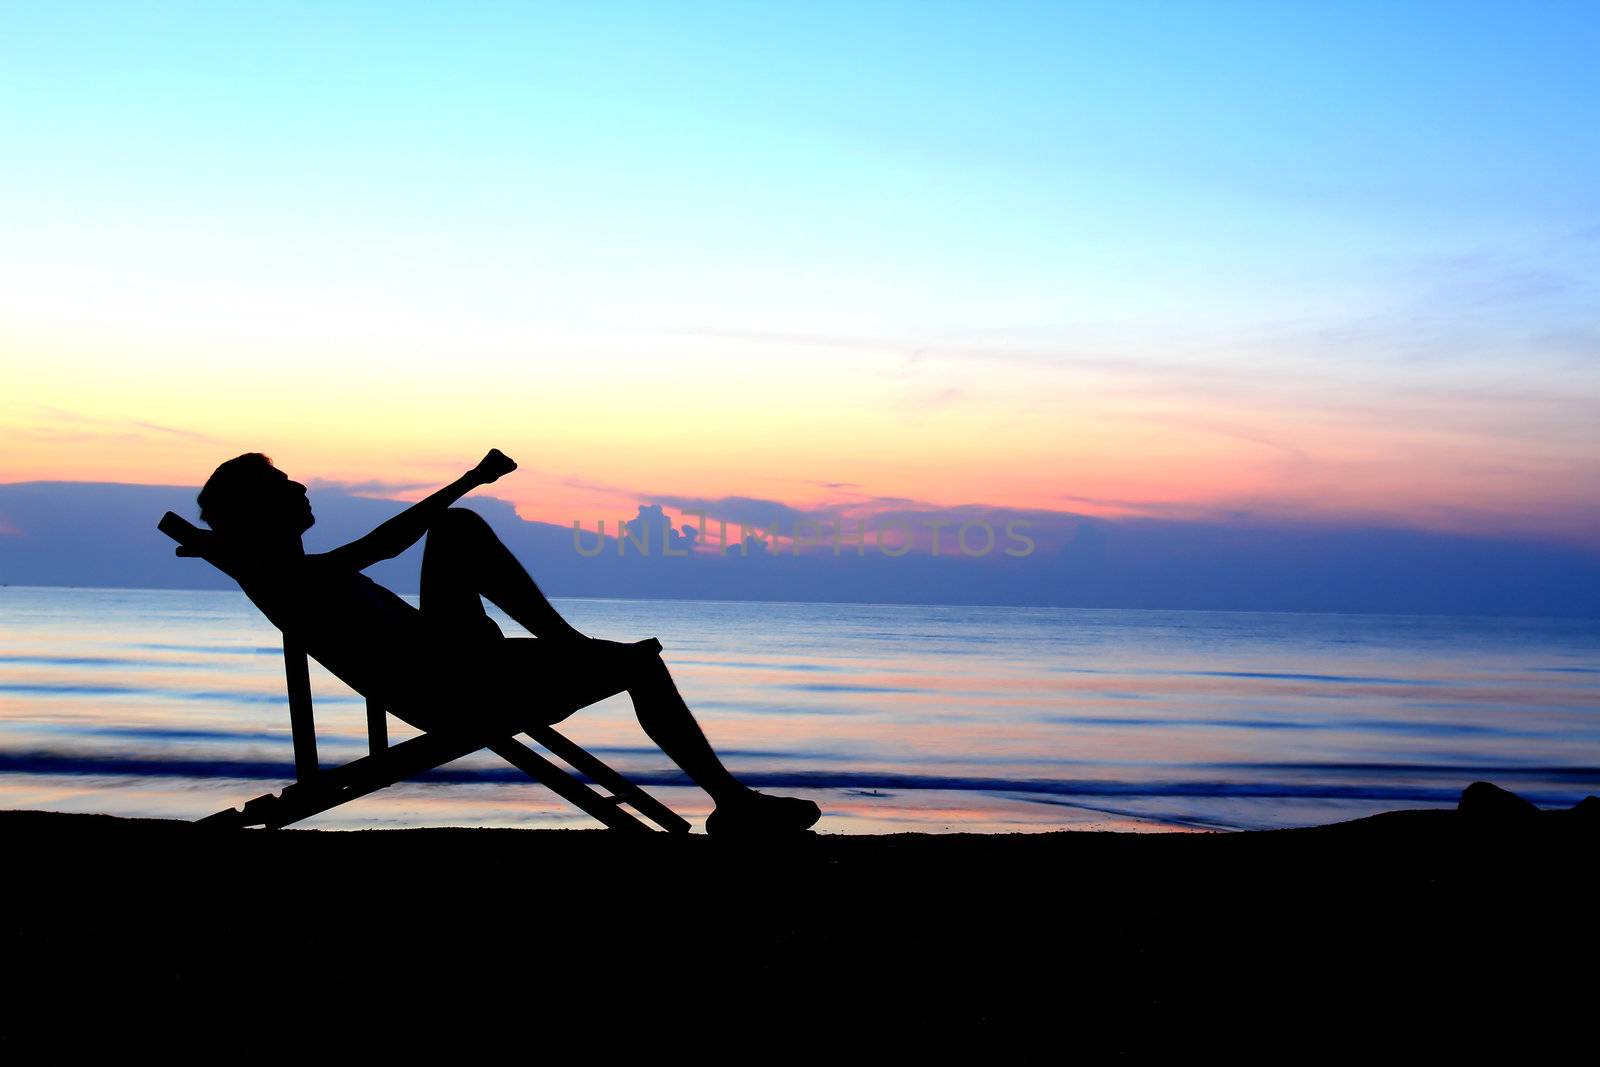 deckchairs and man on beach at sunset